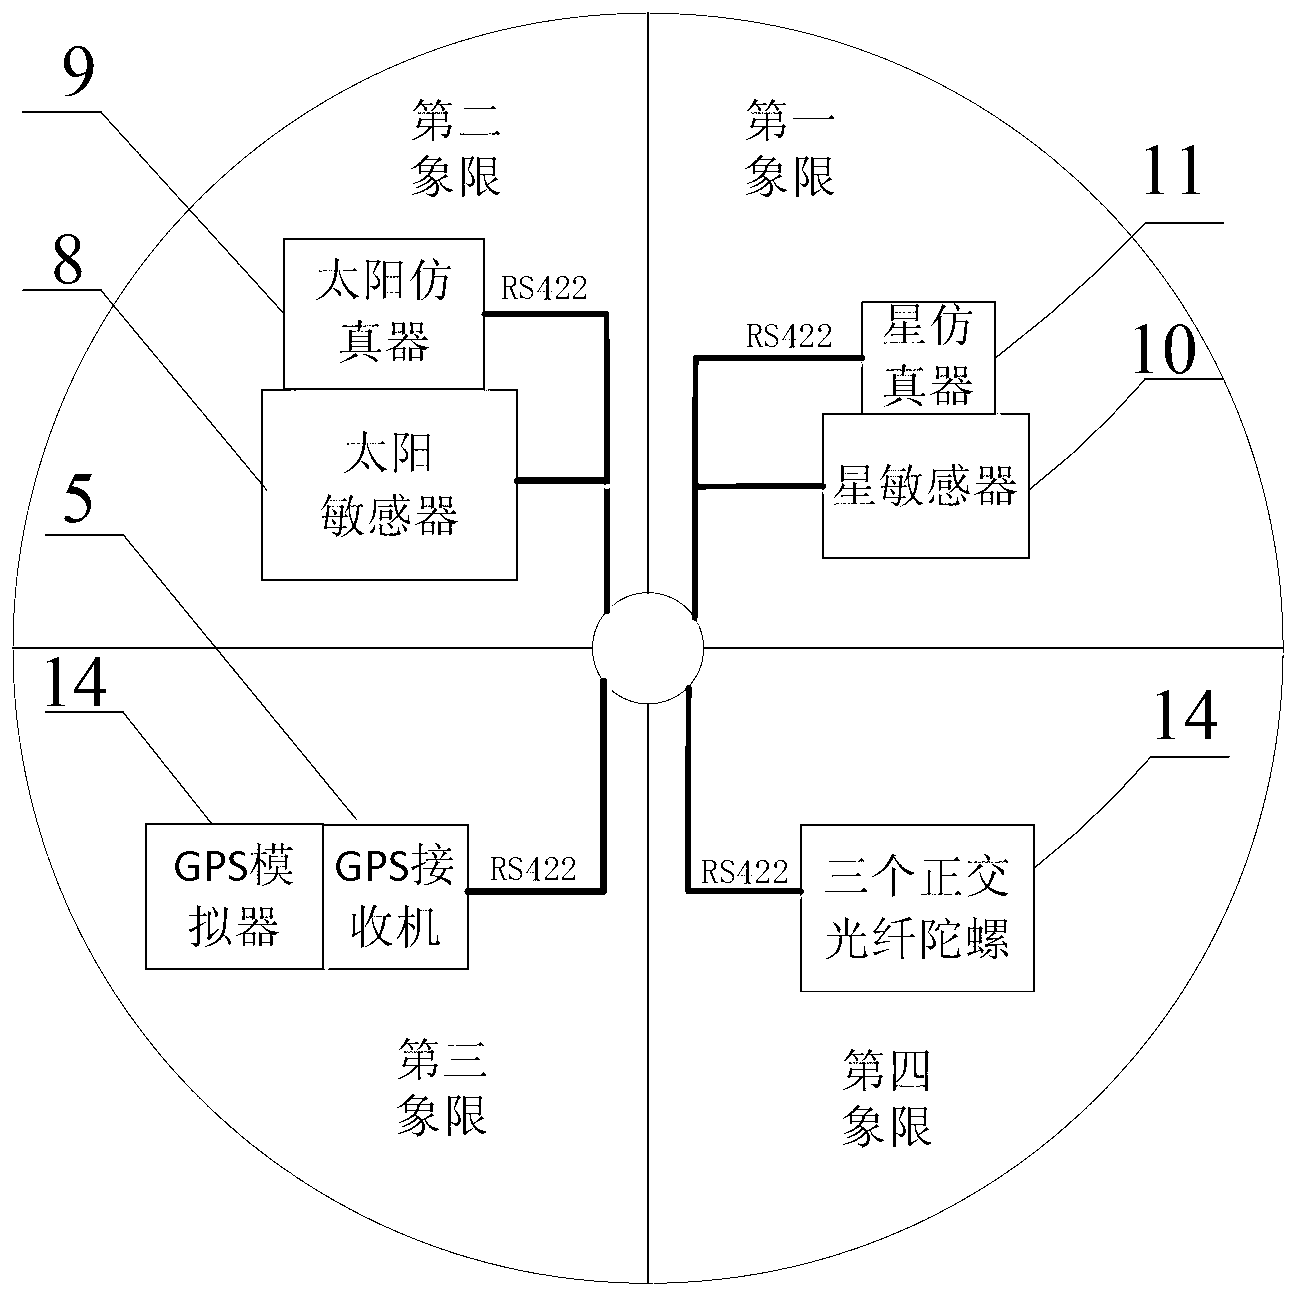 Satellite multiple attitude control mode test system based on double gimbal control moment gyroscope (DGCMG) structure